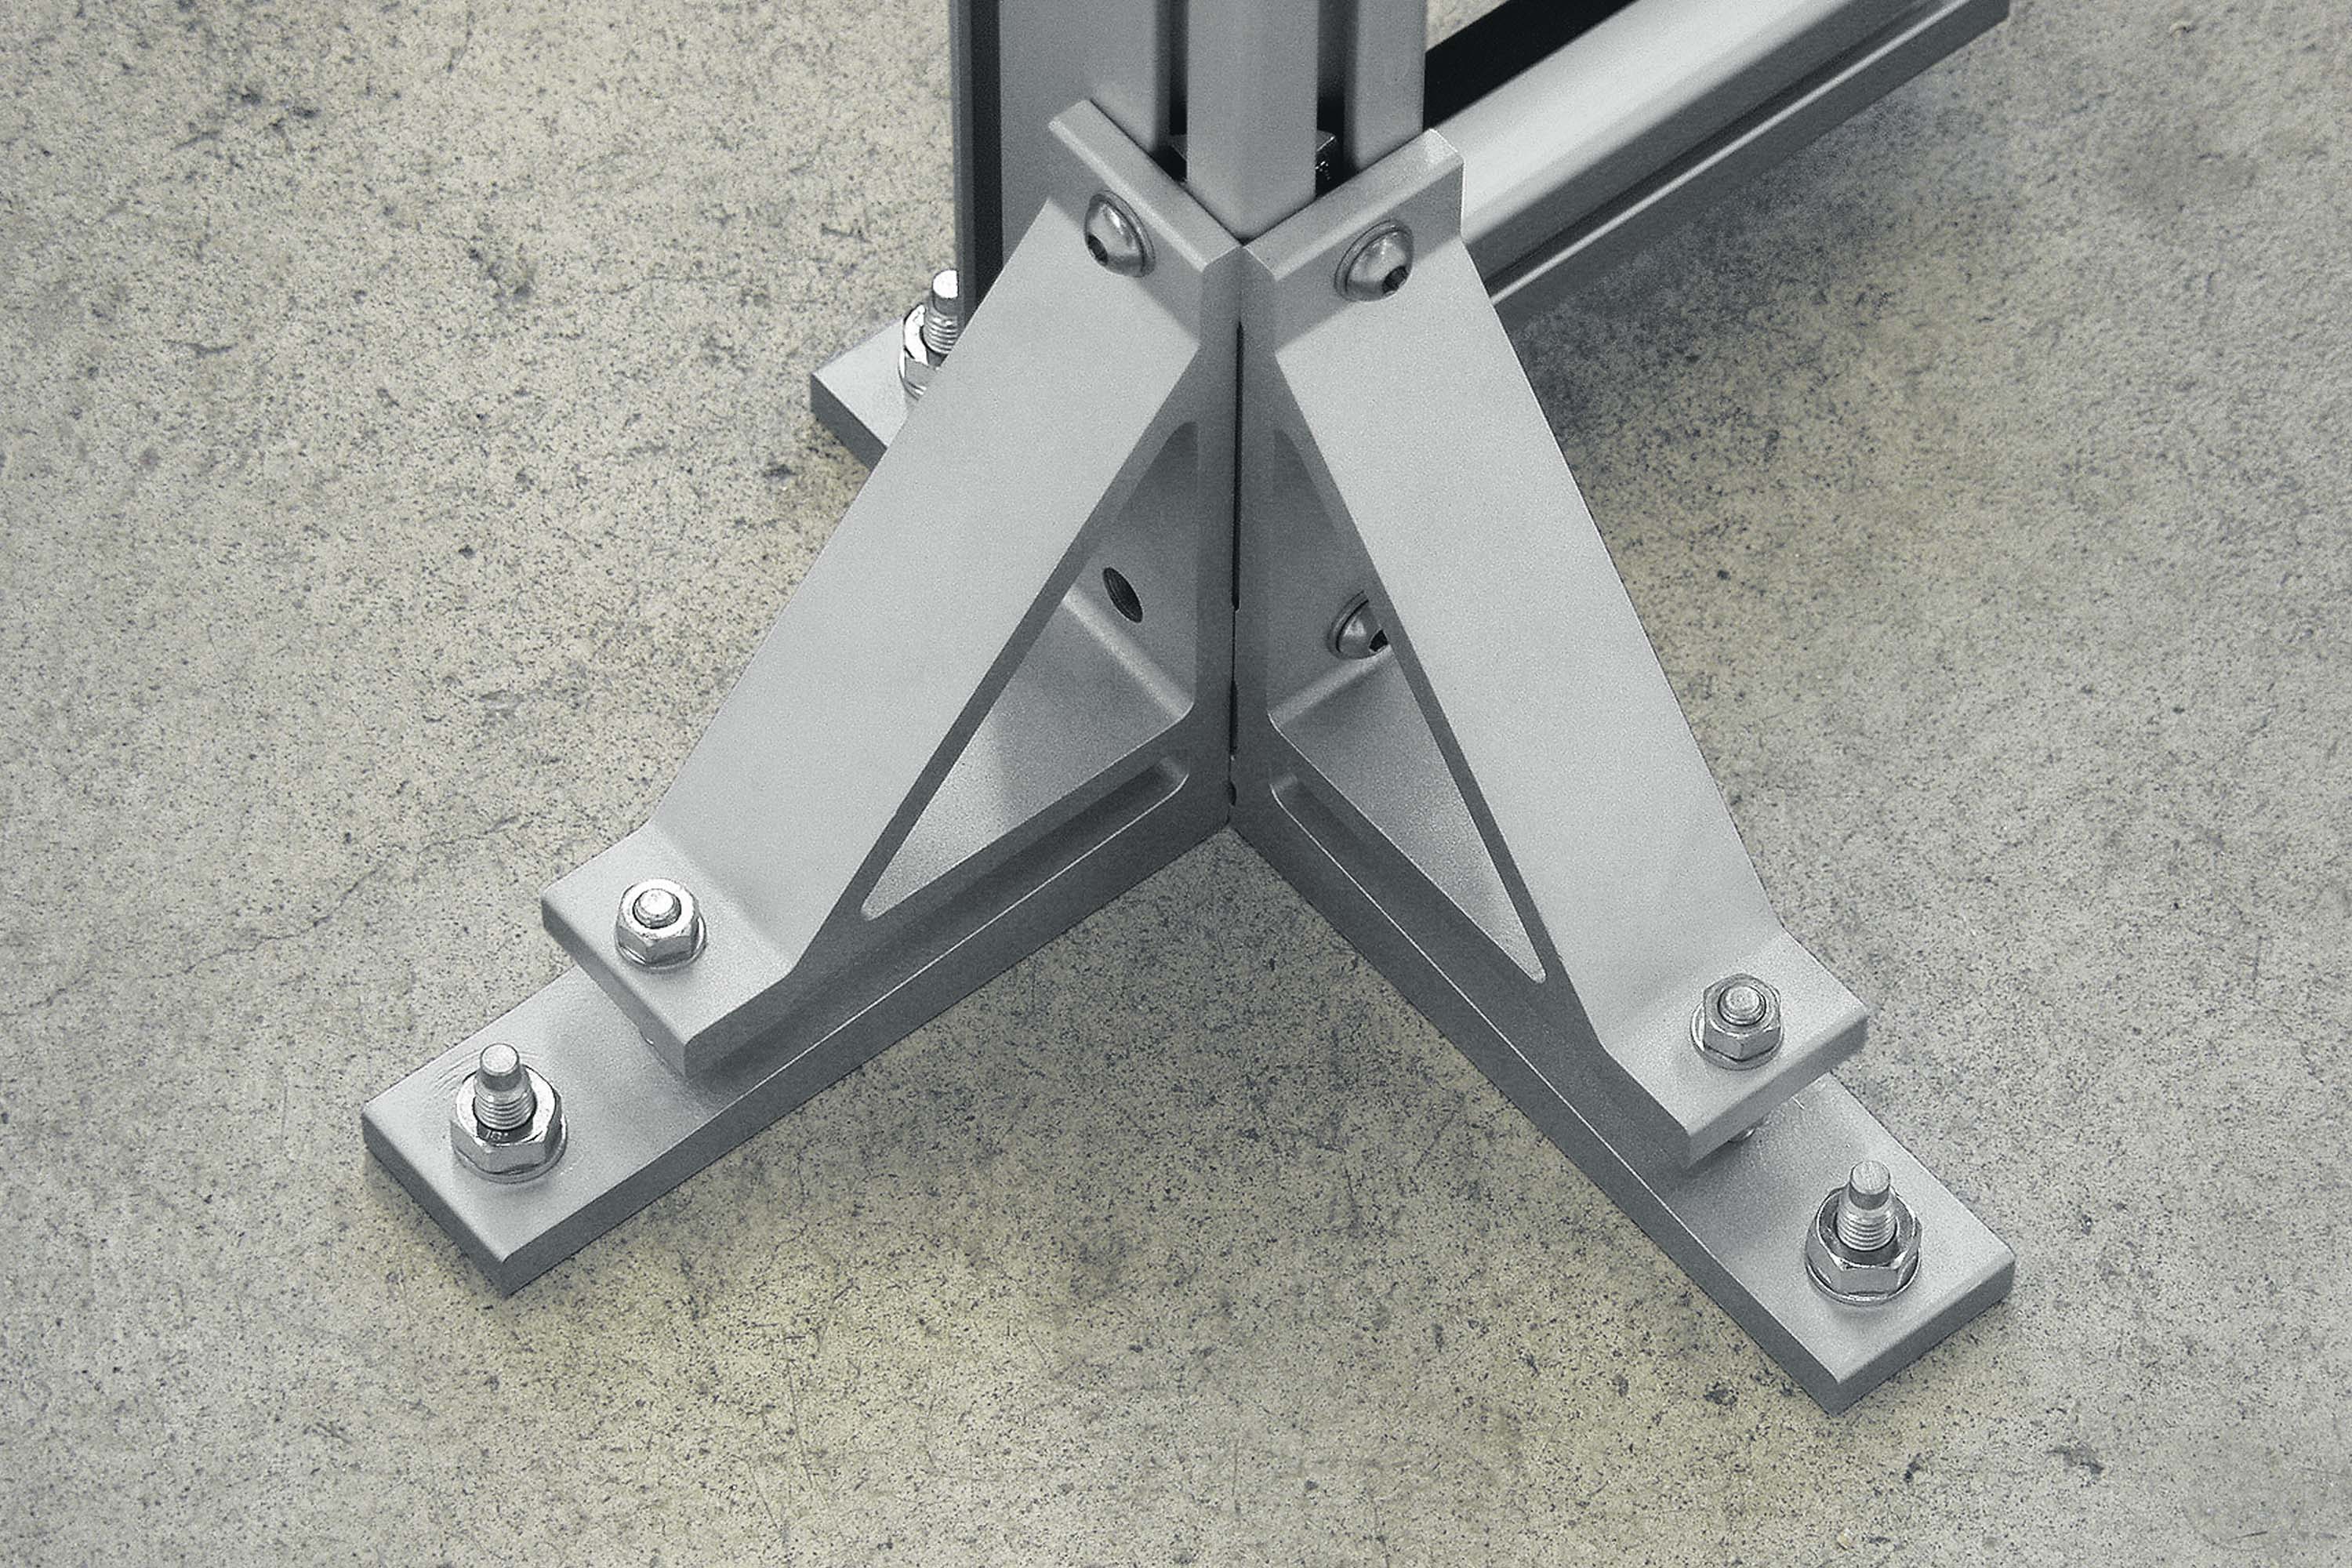 Adjustable Stand Foot 8